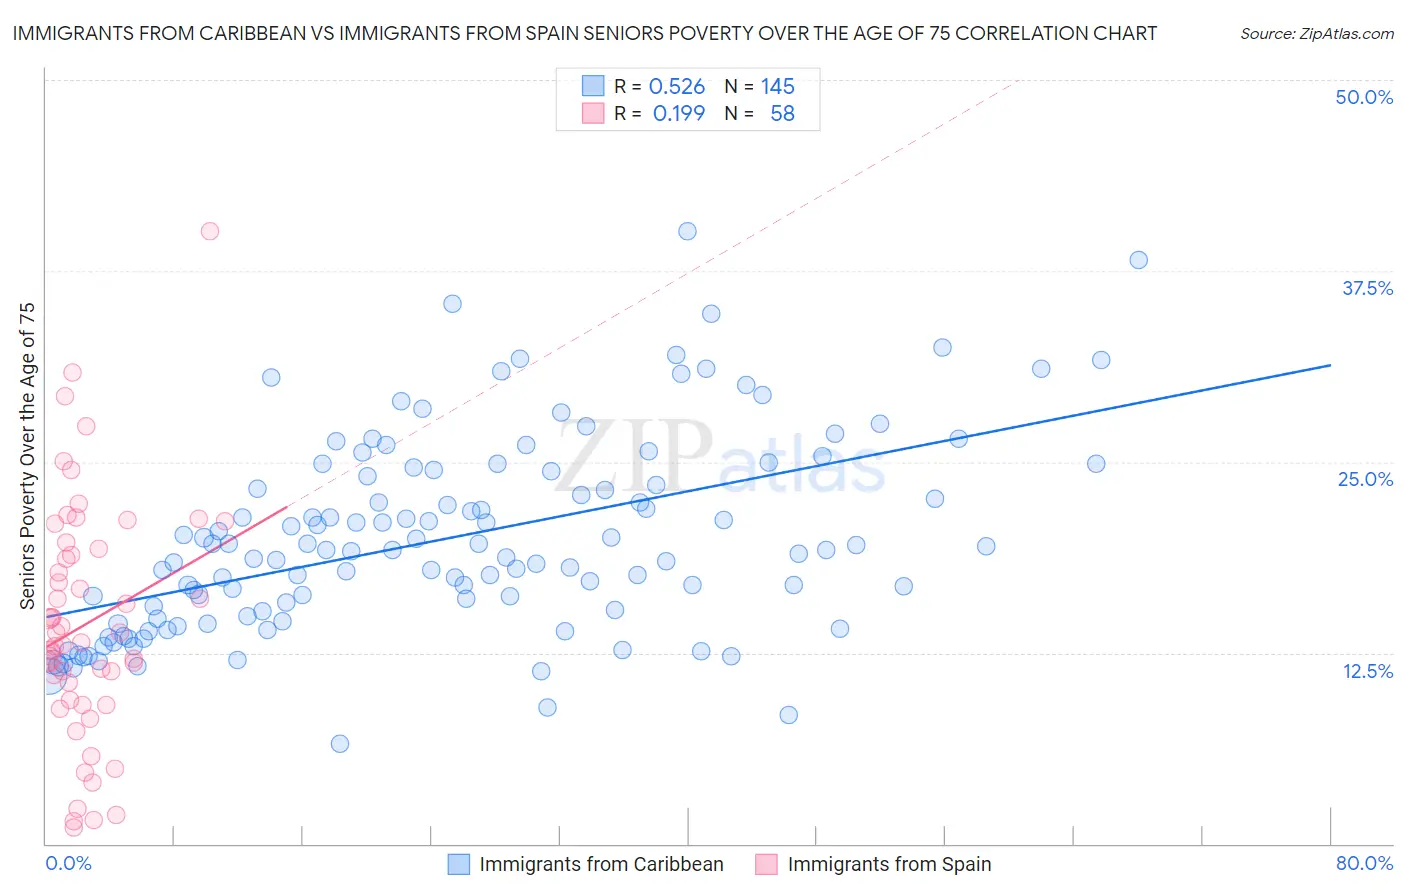 Immigrants from Caribbean vs Immigrants from Spain Seniors Poverty Over the Age of 75